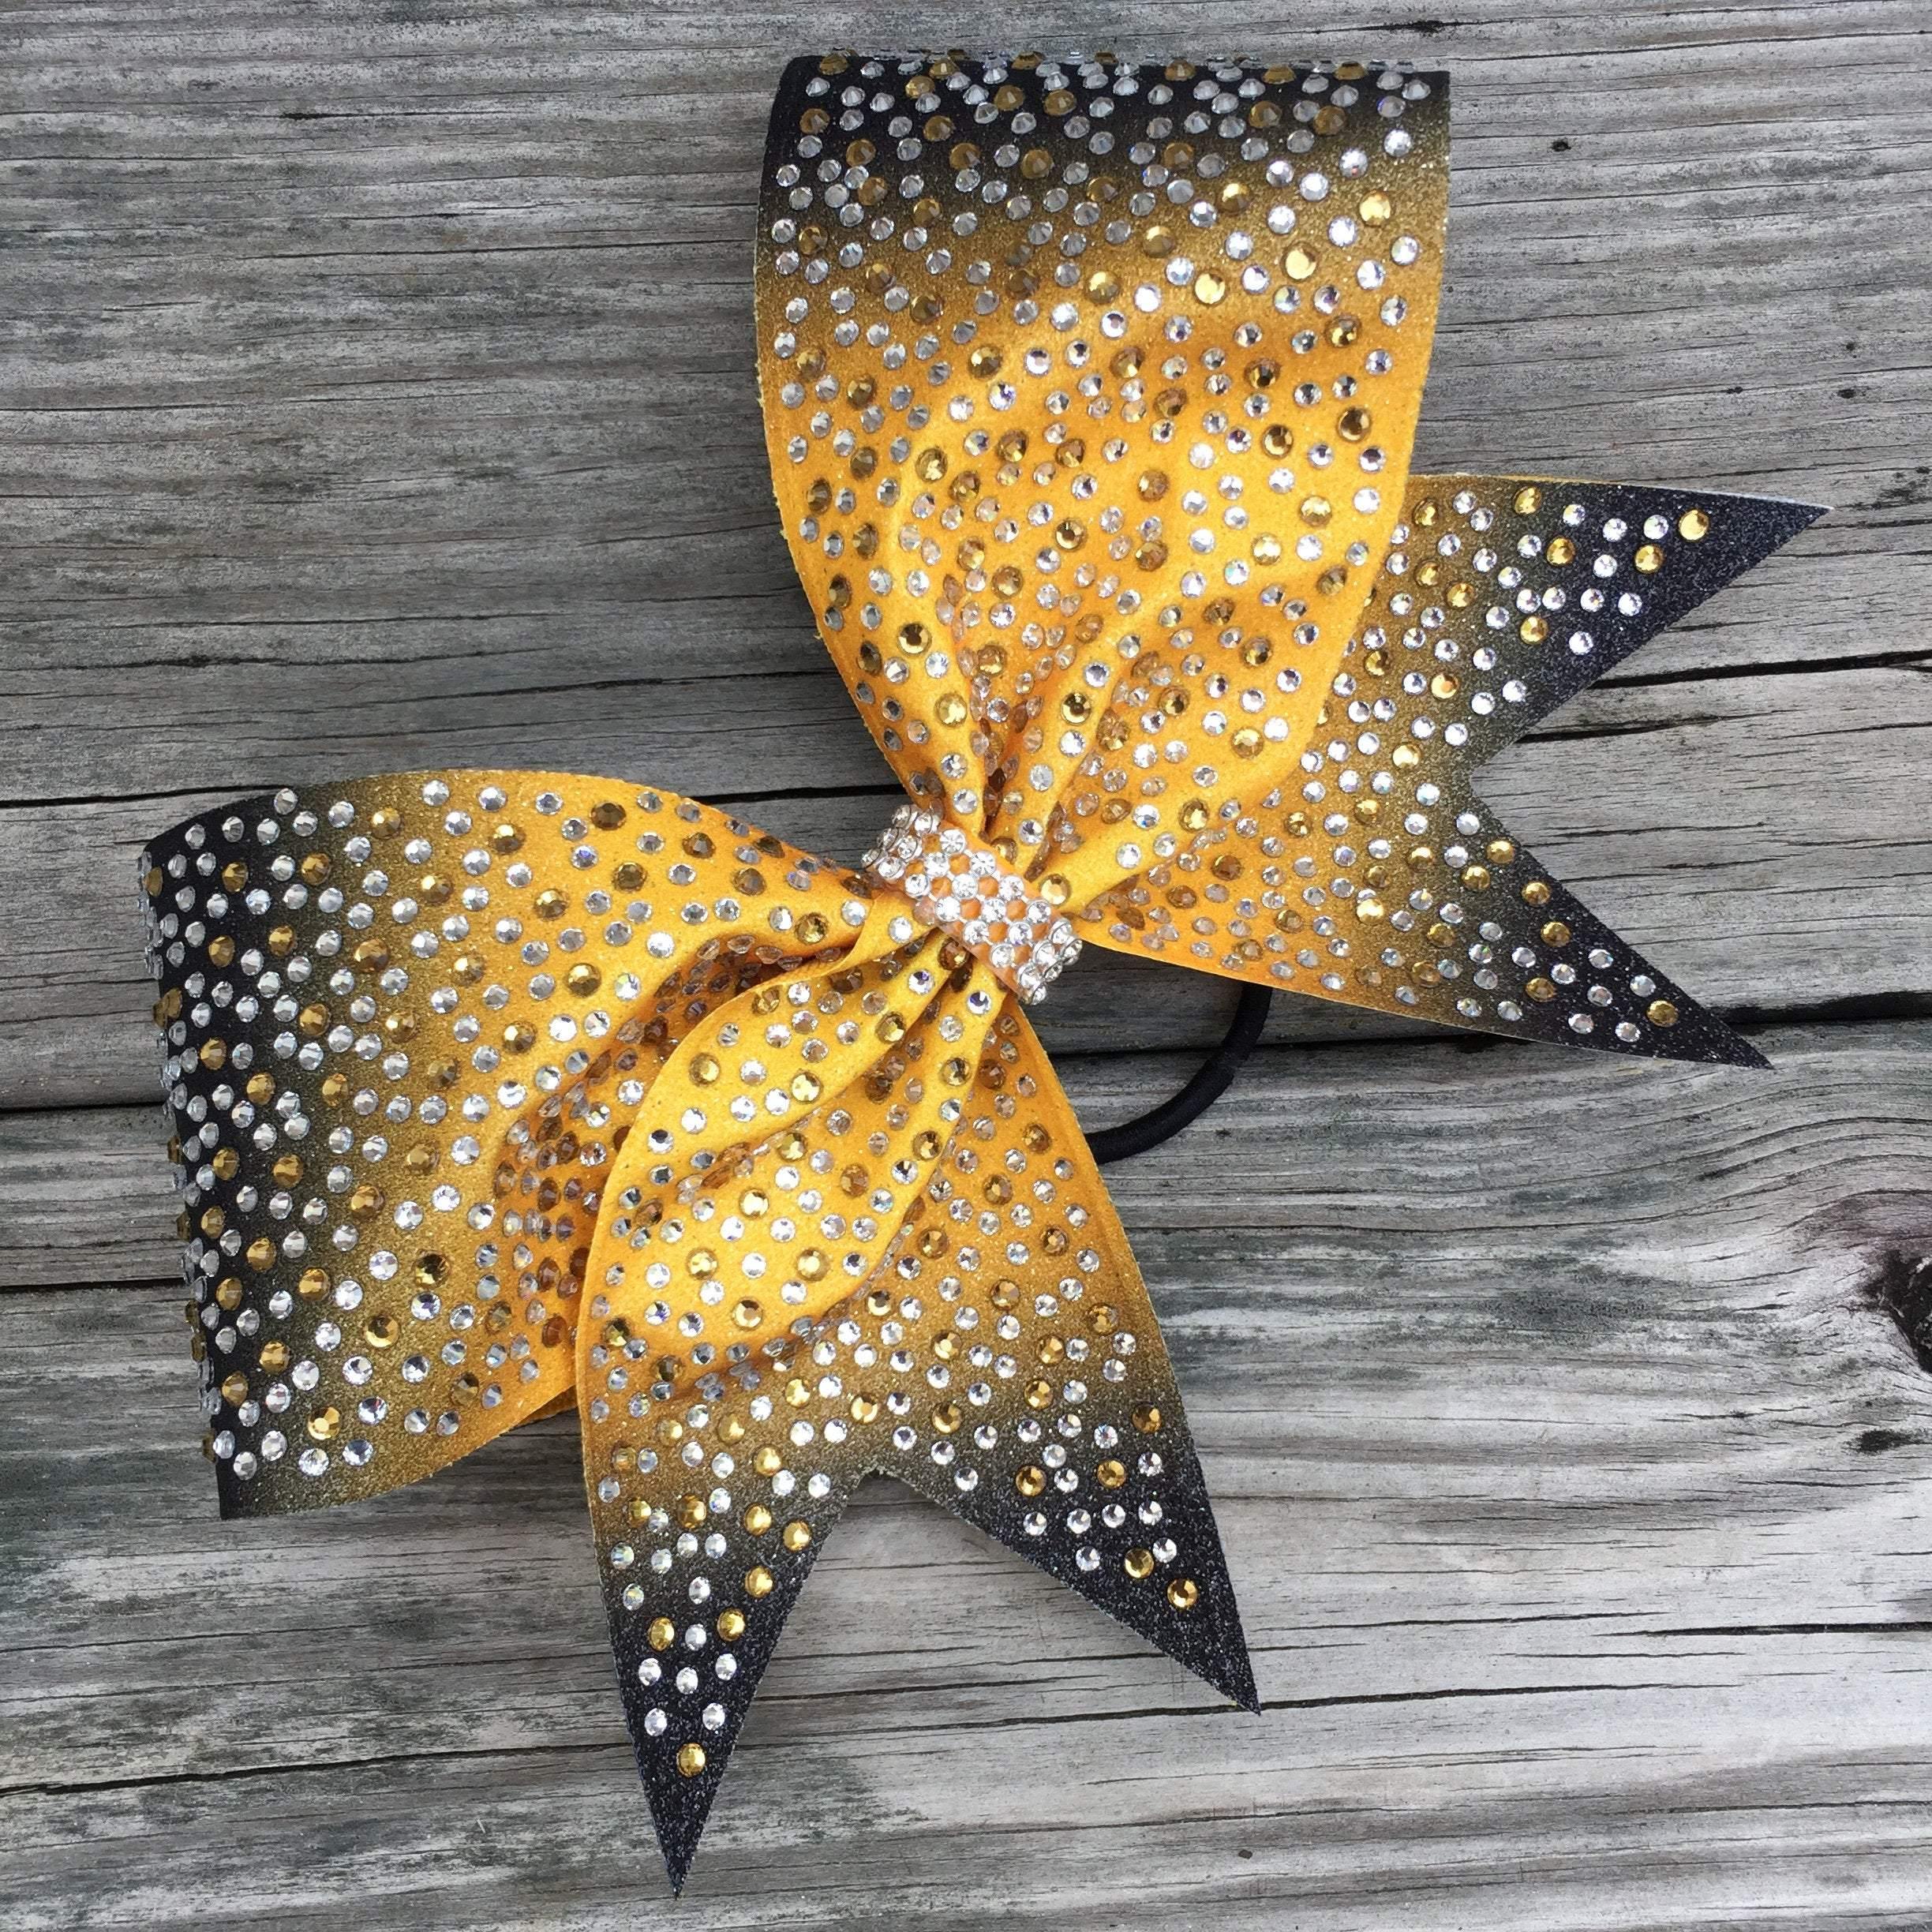 Cheer bow! Bows of London! The sparkliest of them all